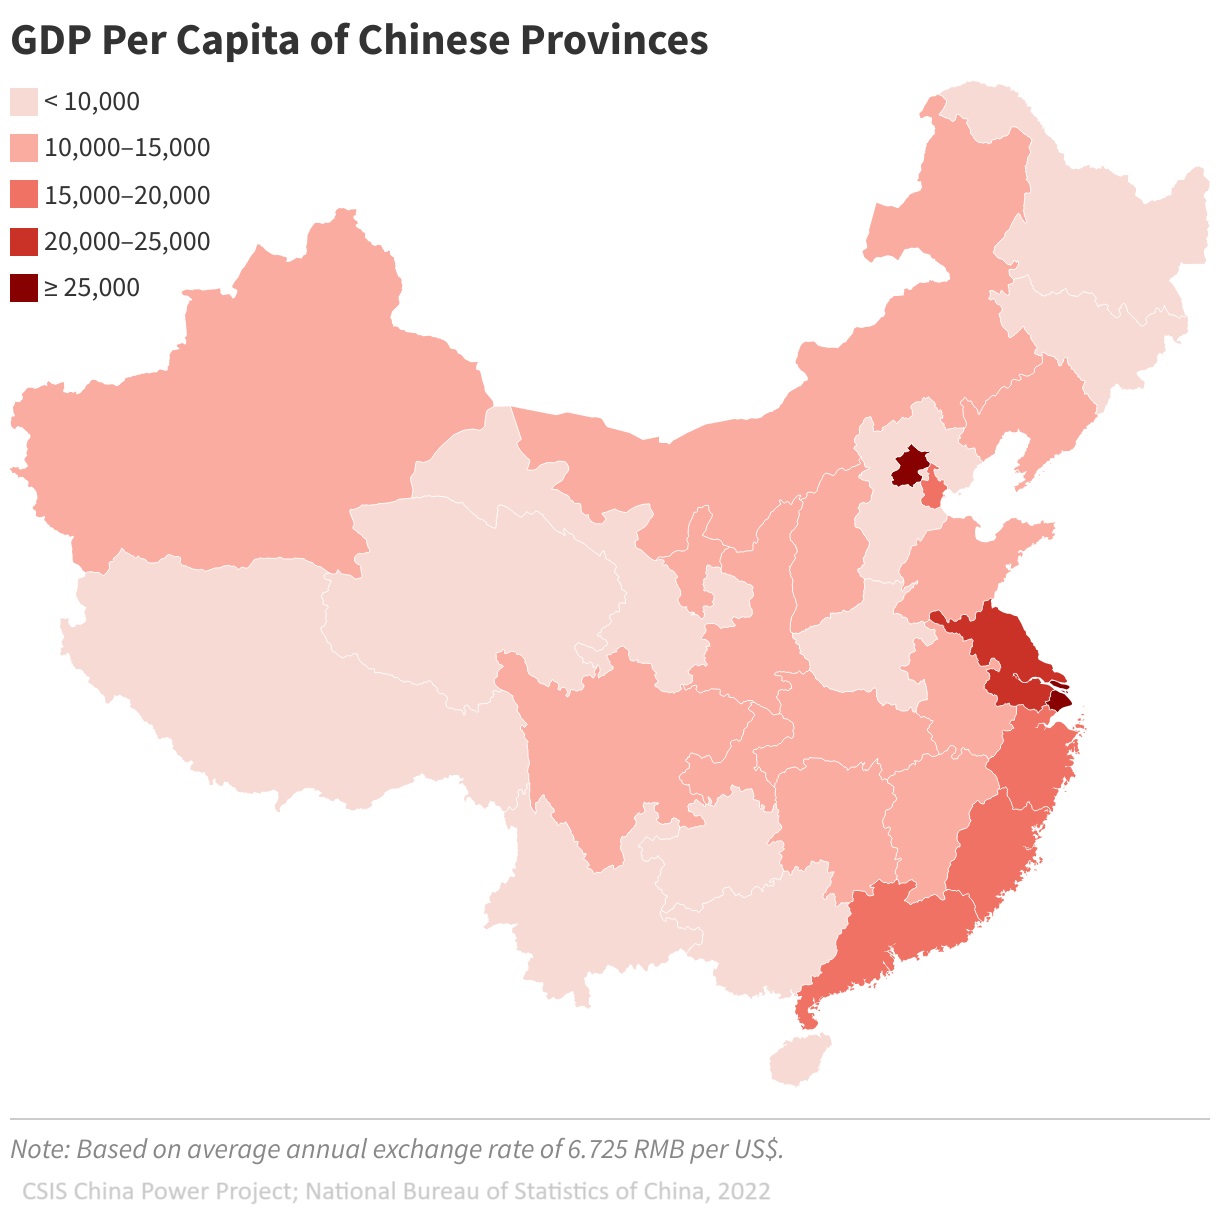 Photo: Where the wealthiest Chinese reside: GDP per capita of Chinese provinces. It's evident how economic life is concentrated in coastal regions and near the capital. Source: CSIS China Power Project; National Bureau of Statistics of China, 2022